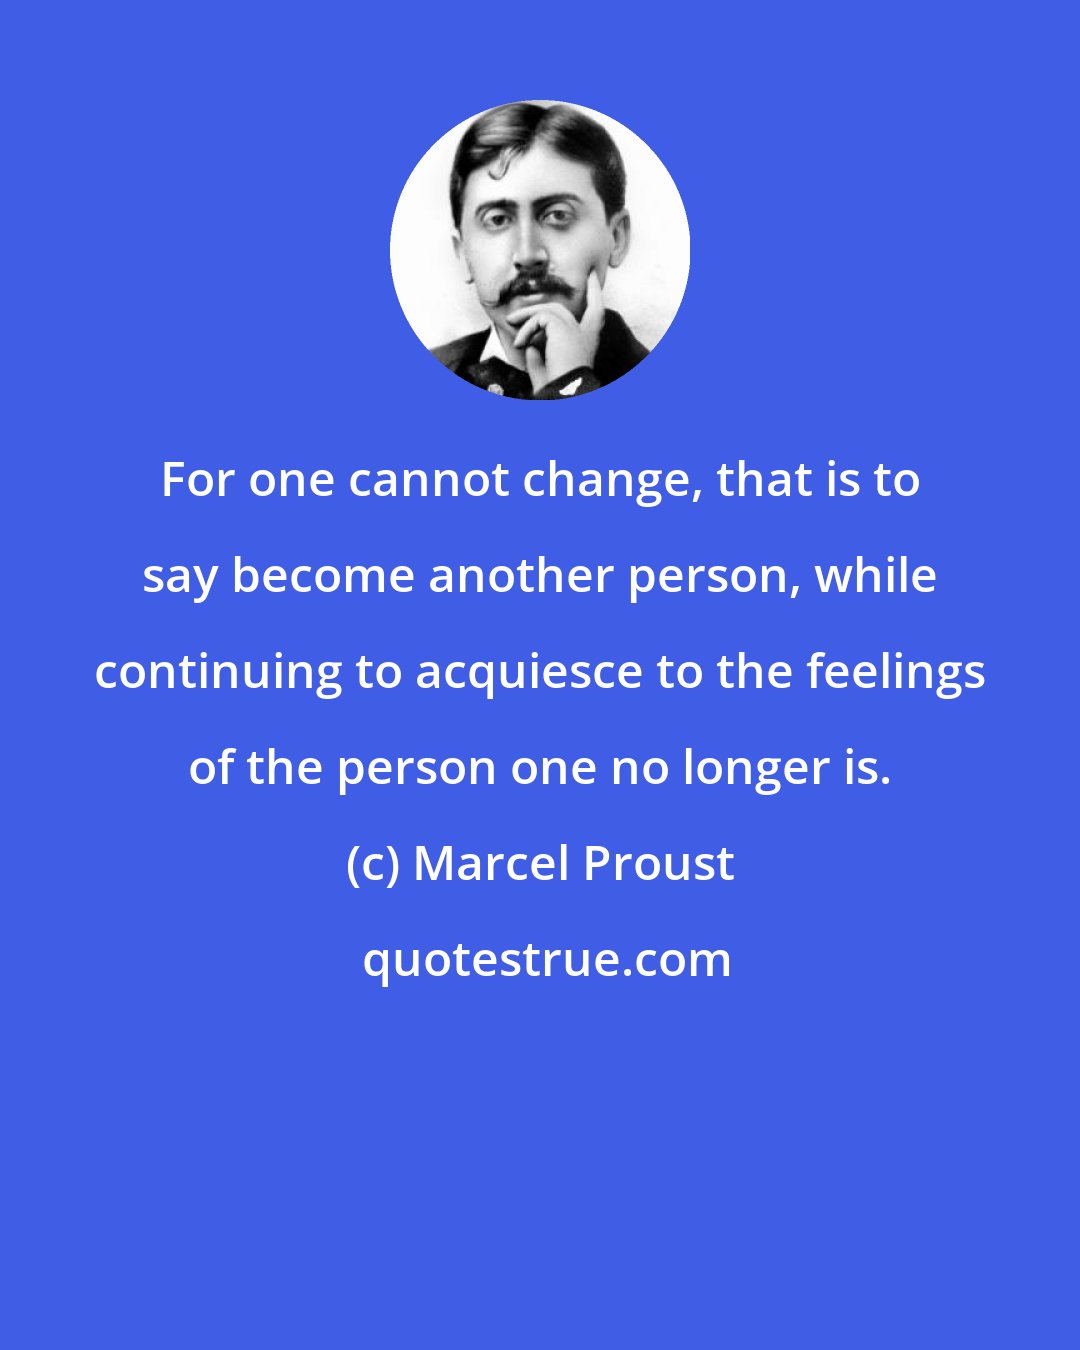 Marcel Proust: For one cannot change, that is to say become another person, while continuing to acquiesce to the feelings of the person one no longer is.